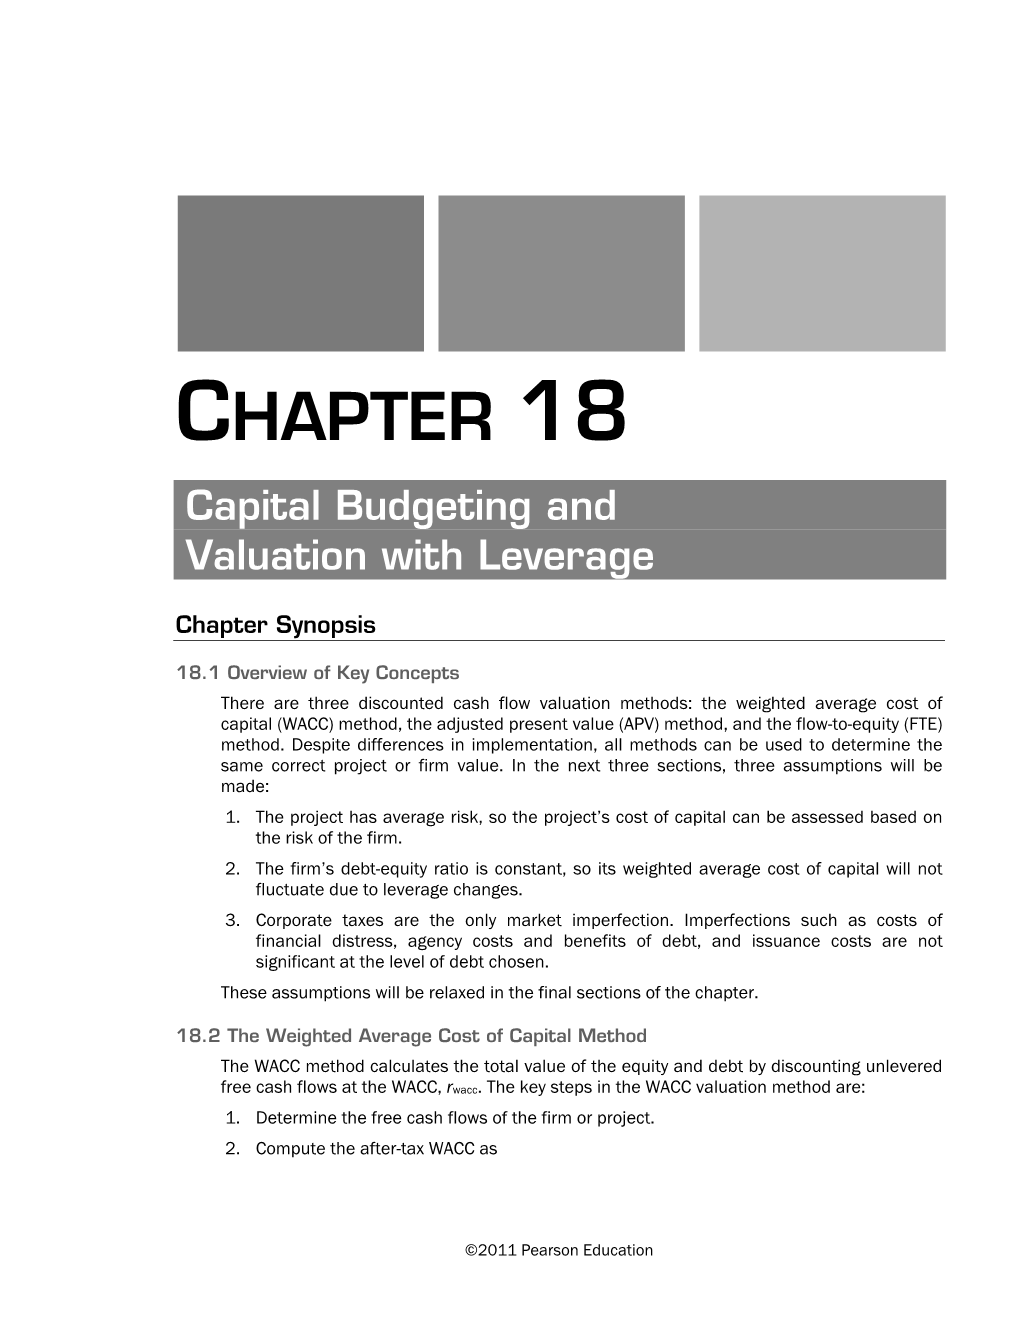 CHAPTER 18 Capital Budgeting and Valuation with Leverage